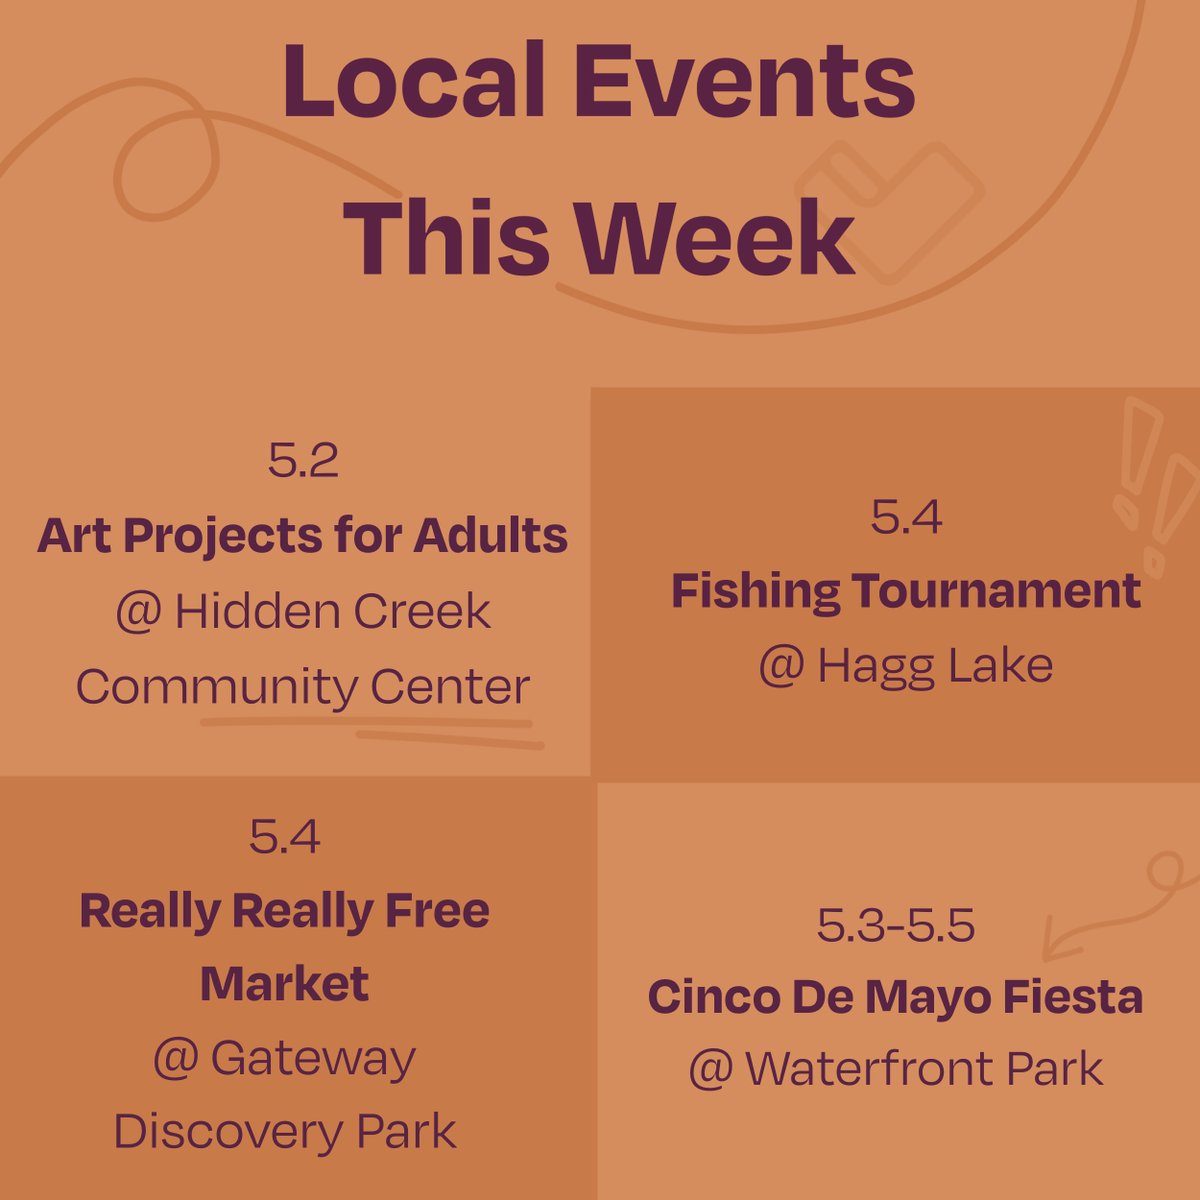 🌟 This week is packed with local fun! 🎉 Check out what’s happening around town. Mark your calendars and join the community vibes! 

#PortlandEvents #CincoDeMayo #Portland #ForritCU